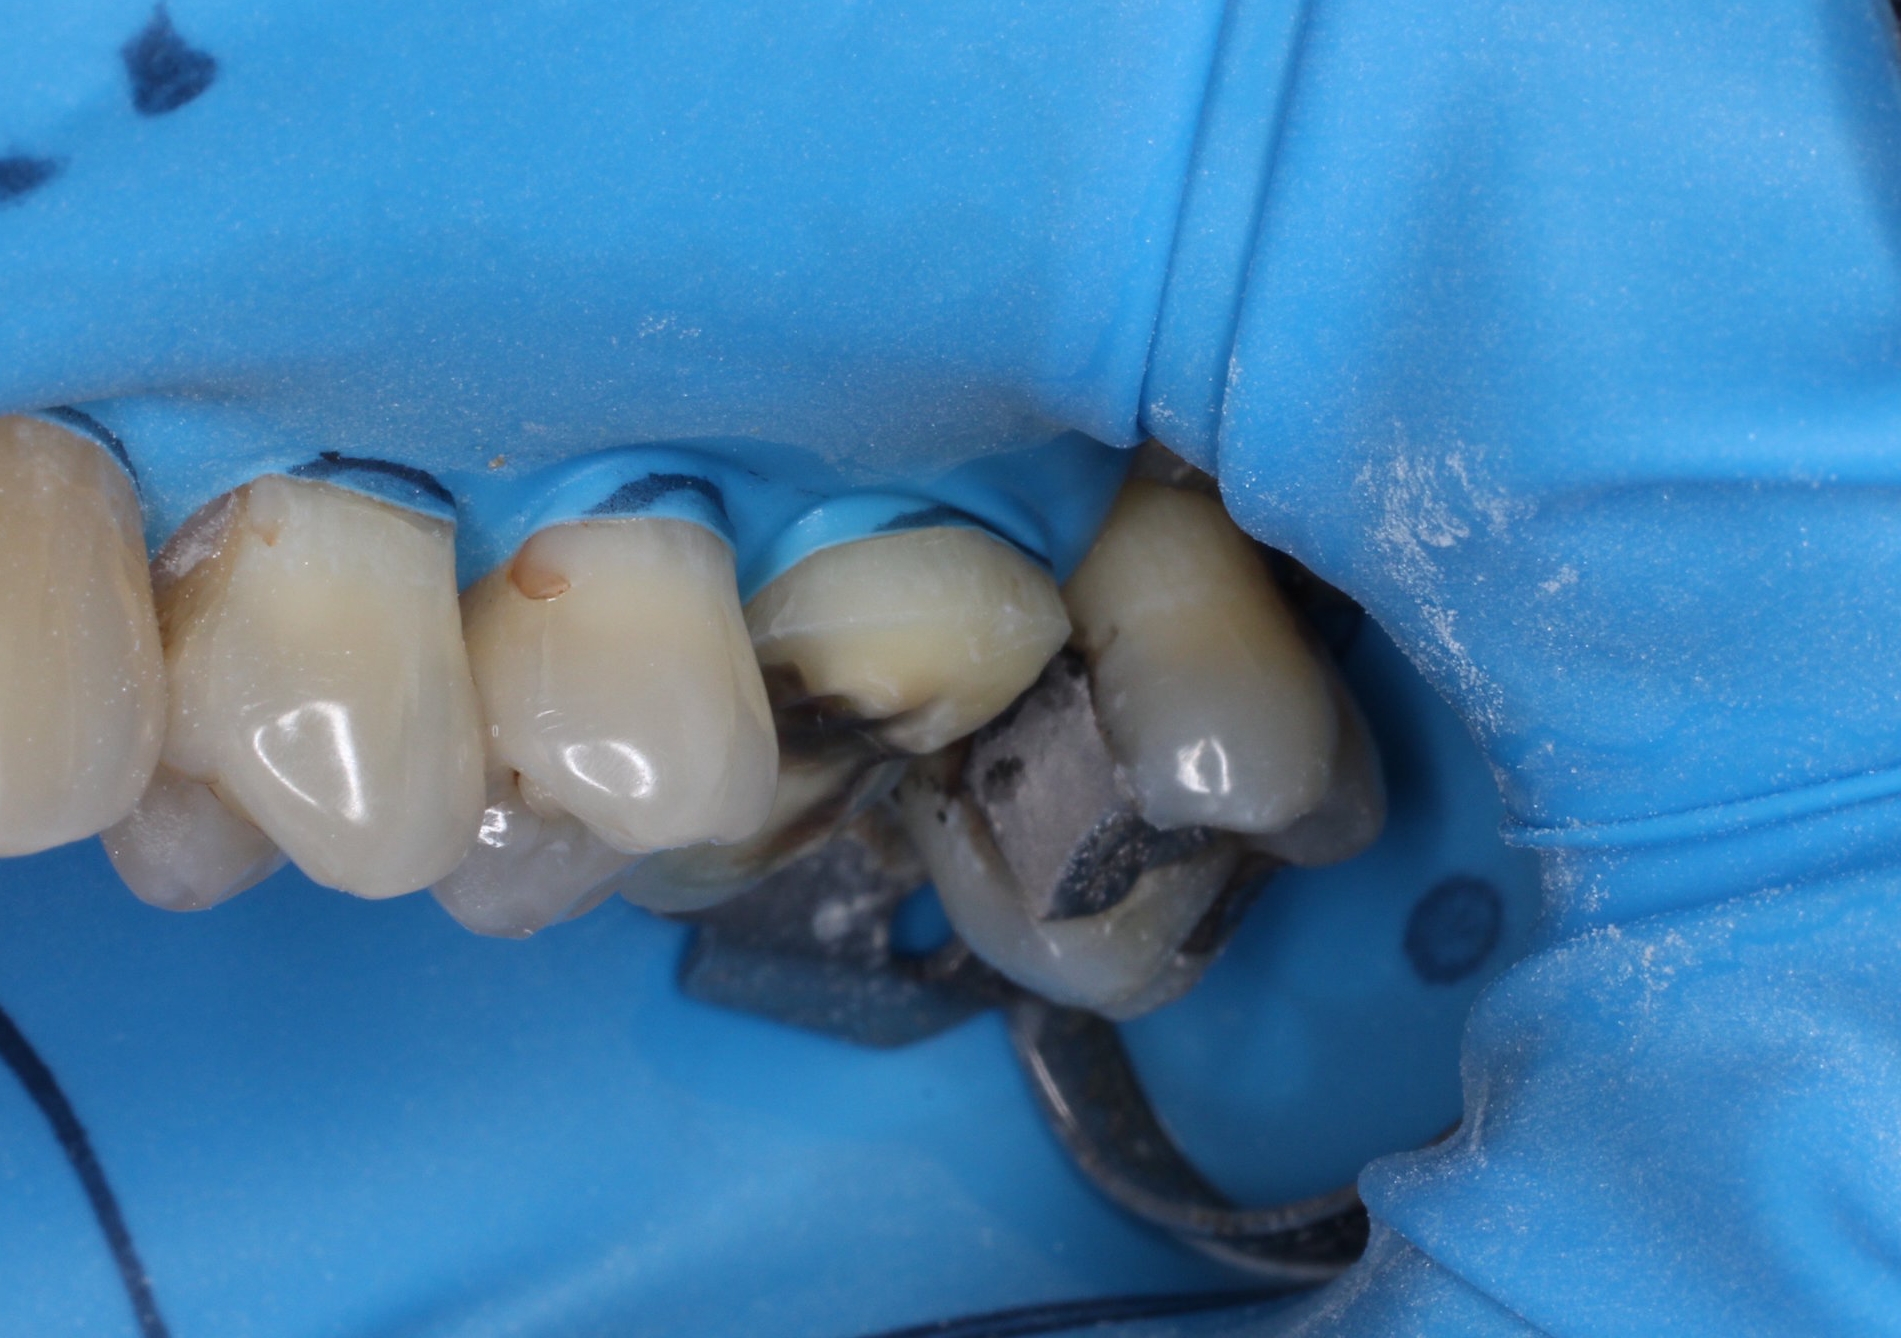 Conservative preparation of the tooth